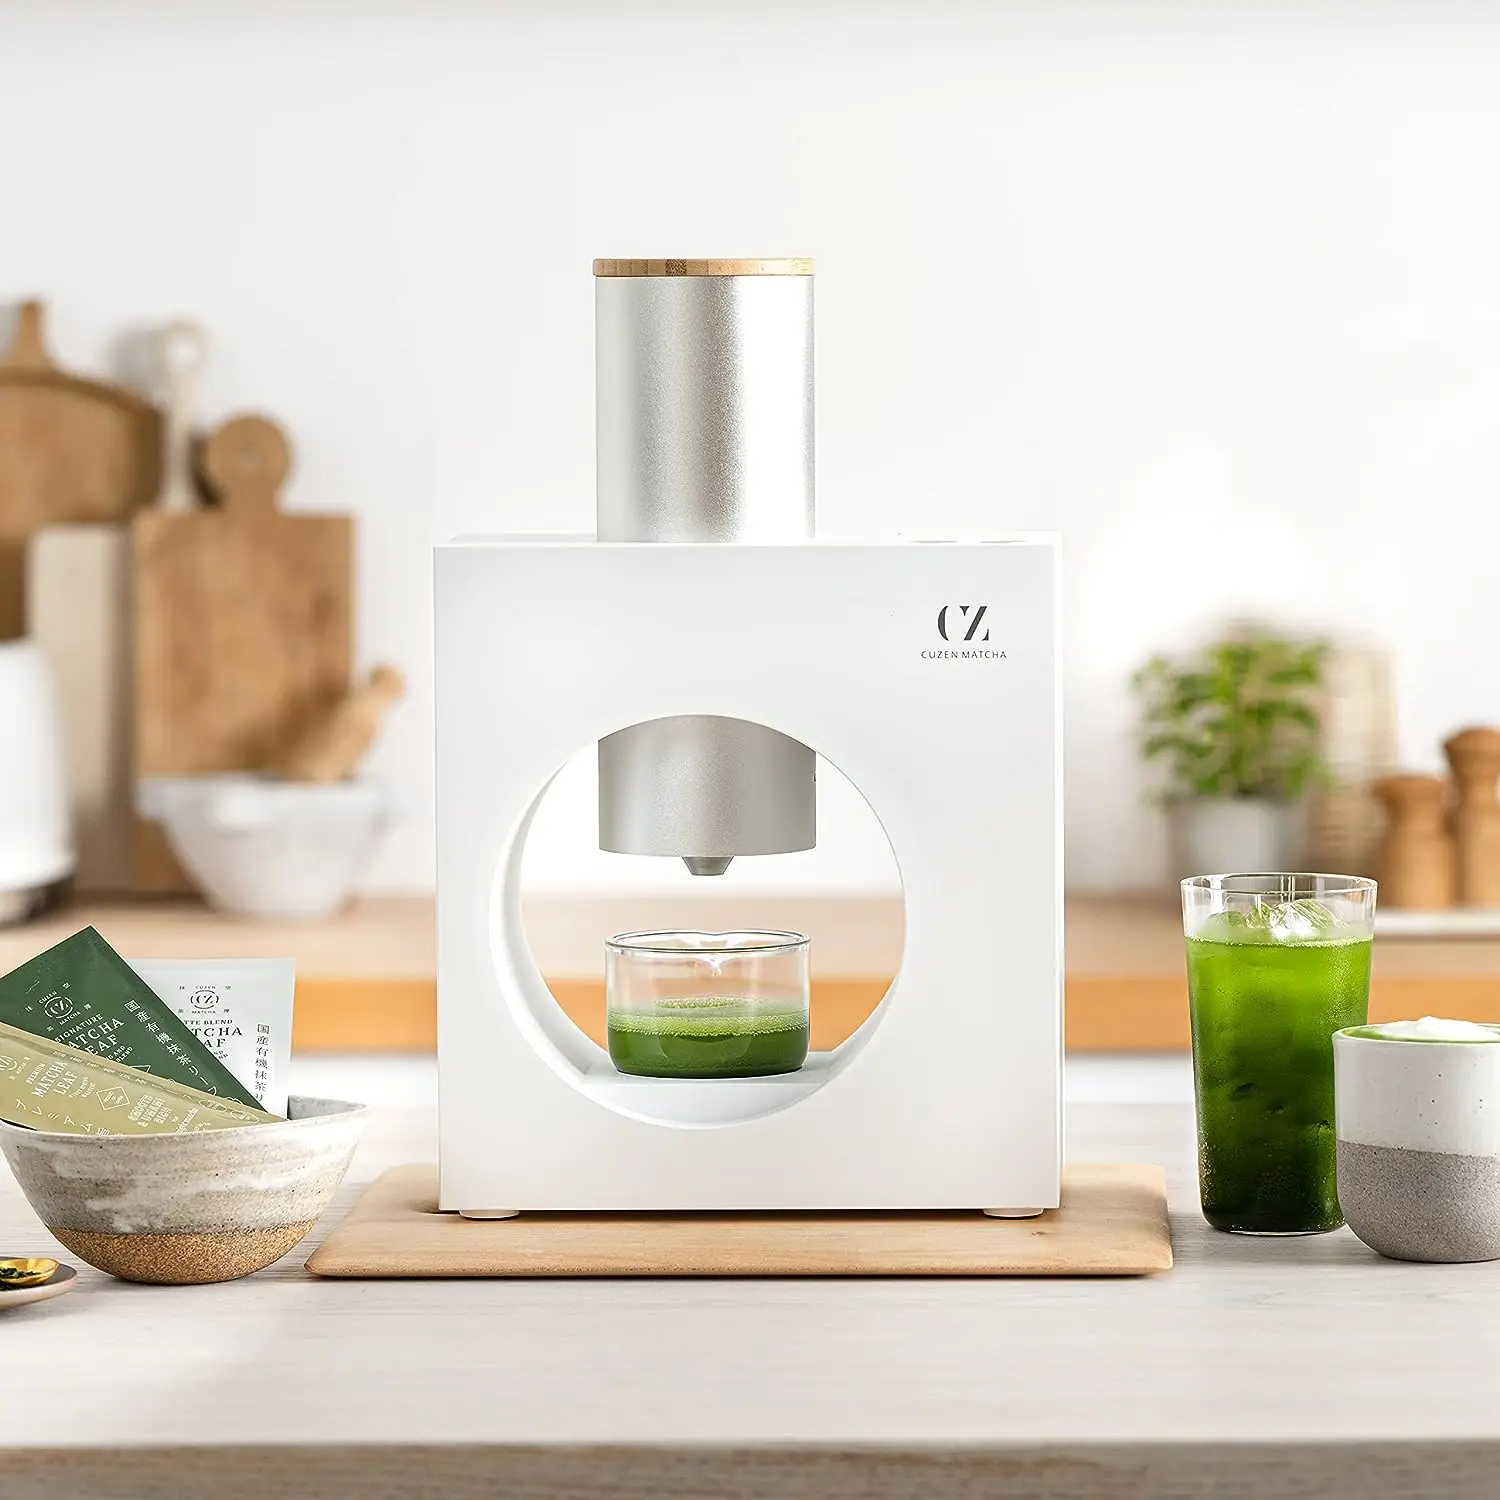 

Starter Kit, an Innovative At-home Matcha Machine that Produces Freshly Ground Matcha from Organic Shade-grown Japanese Tea Leav